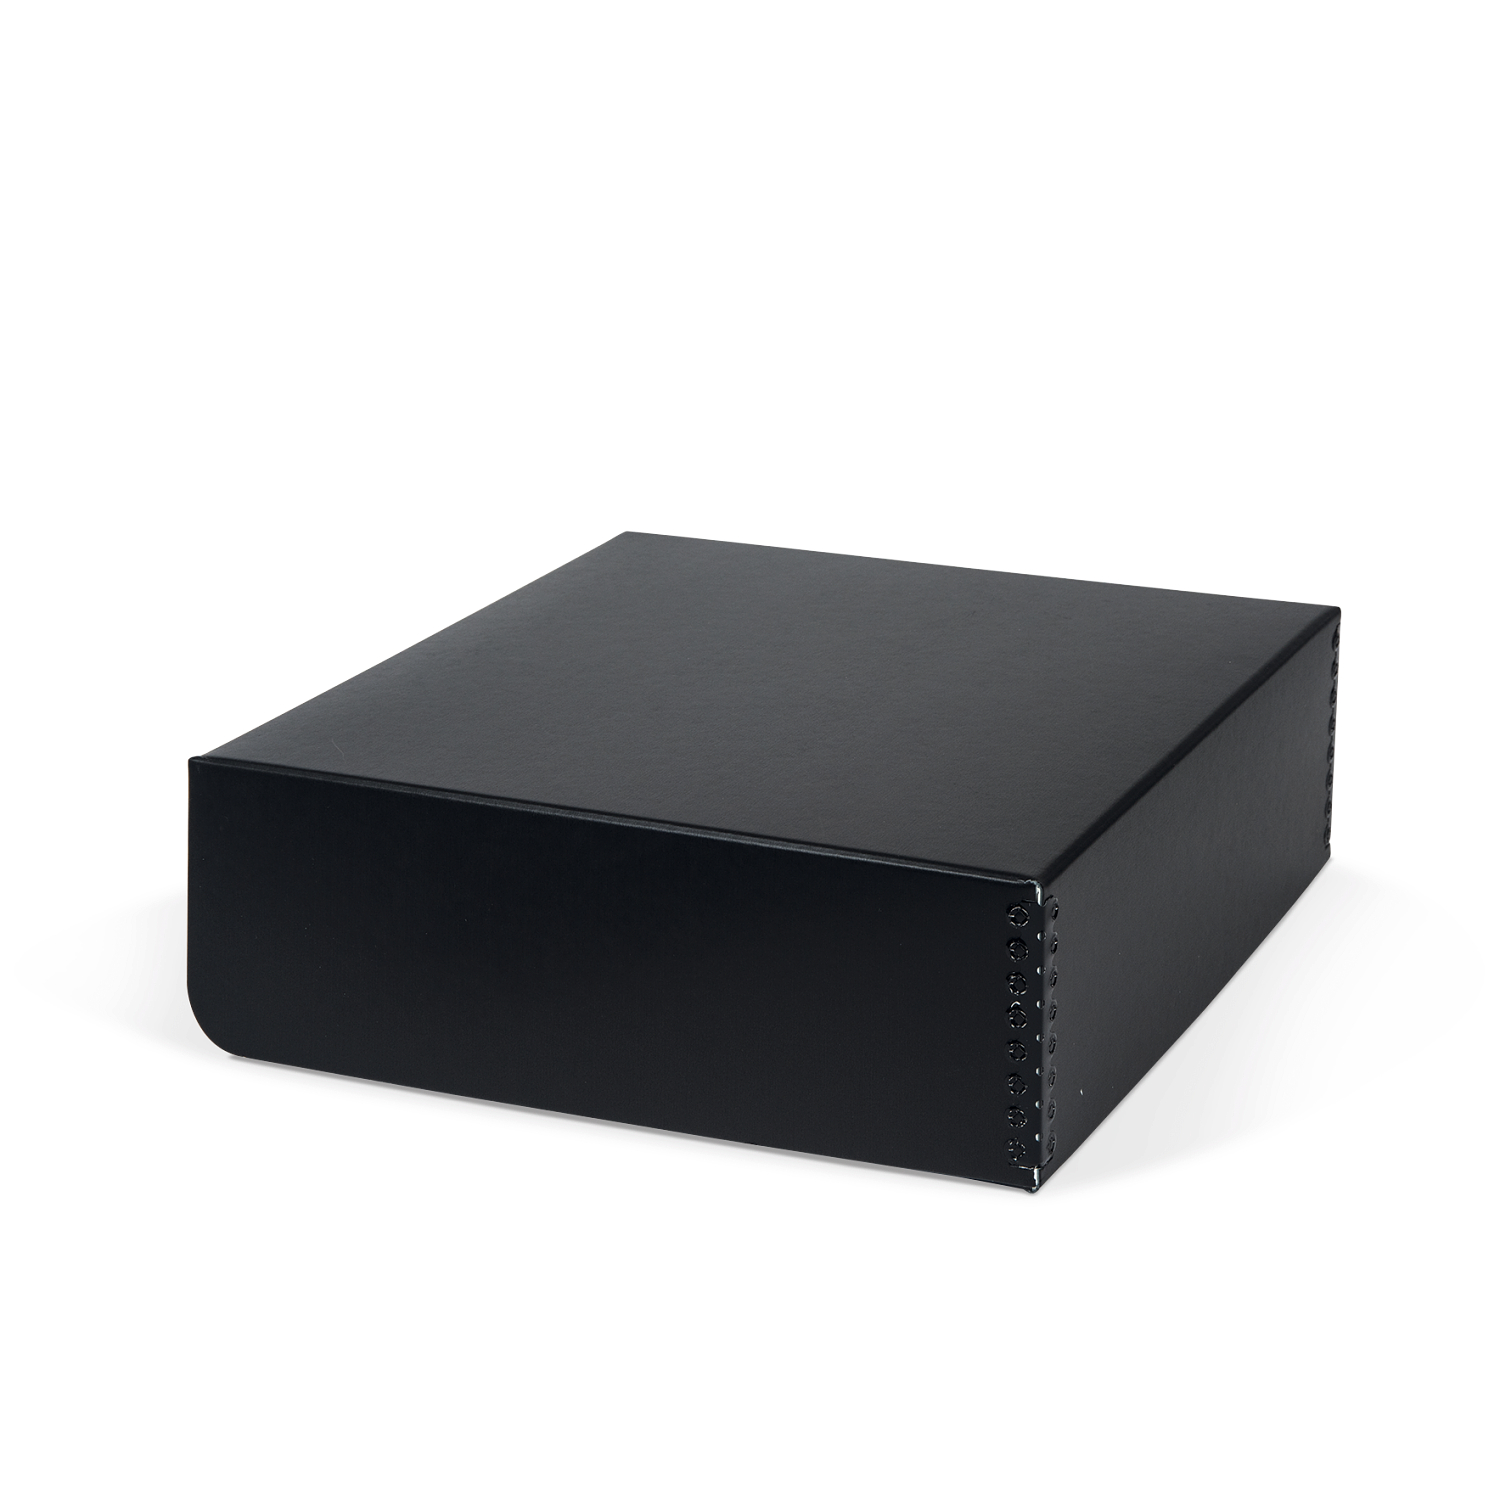 Gaylord Archival® Storage Box for D-Ring Gallery II Oversize Album, Archival Storage Boxes, Preservation